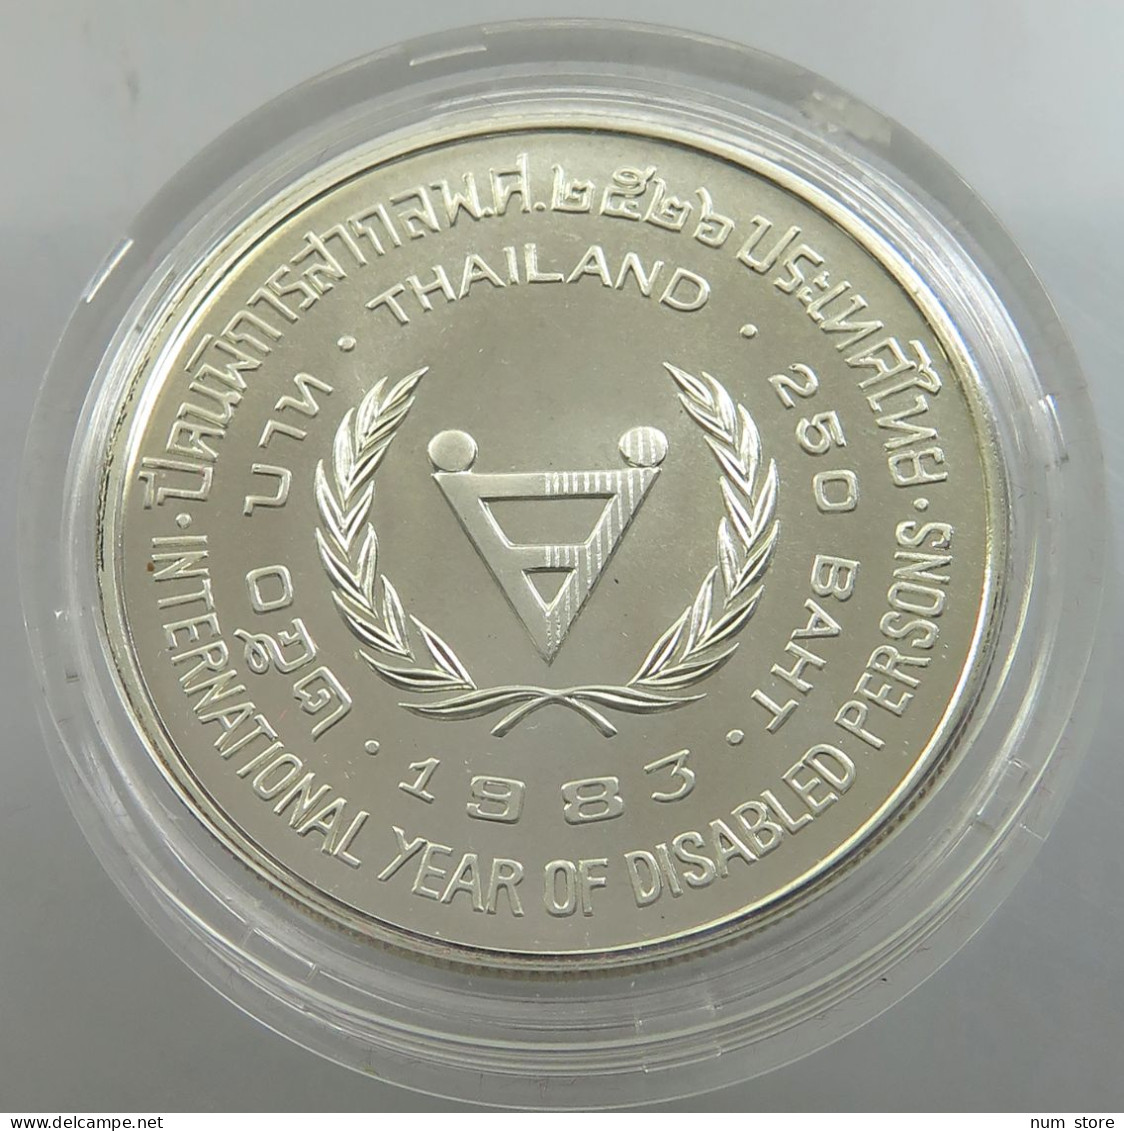 THAILAND 250 BAHT 1983 International Year Of Disabled Persons SILVER UNC #sm14 0045 - Tailandia